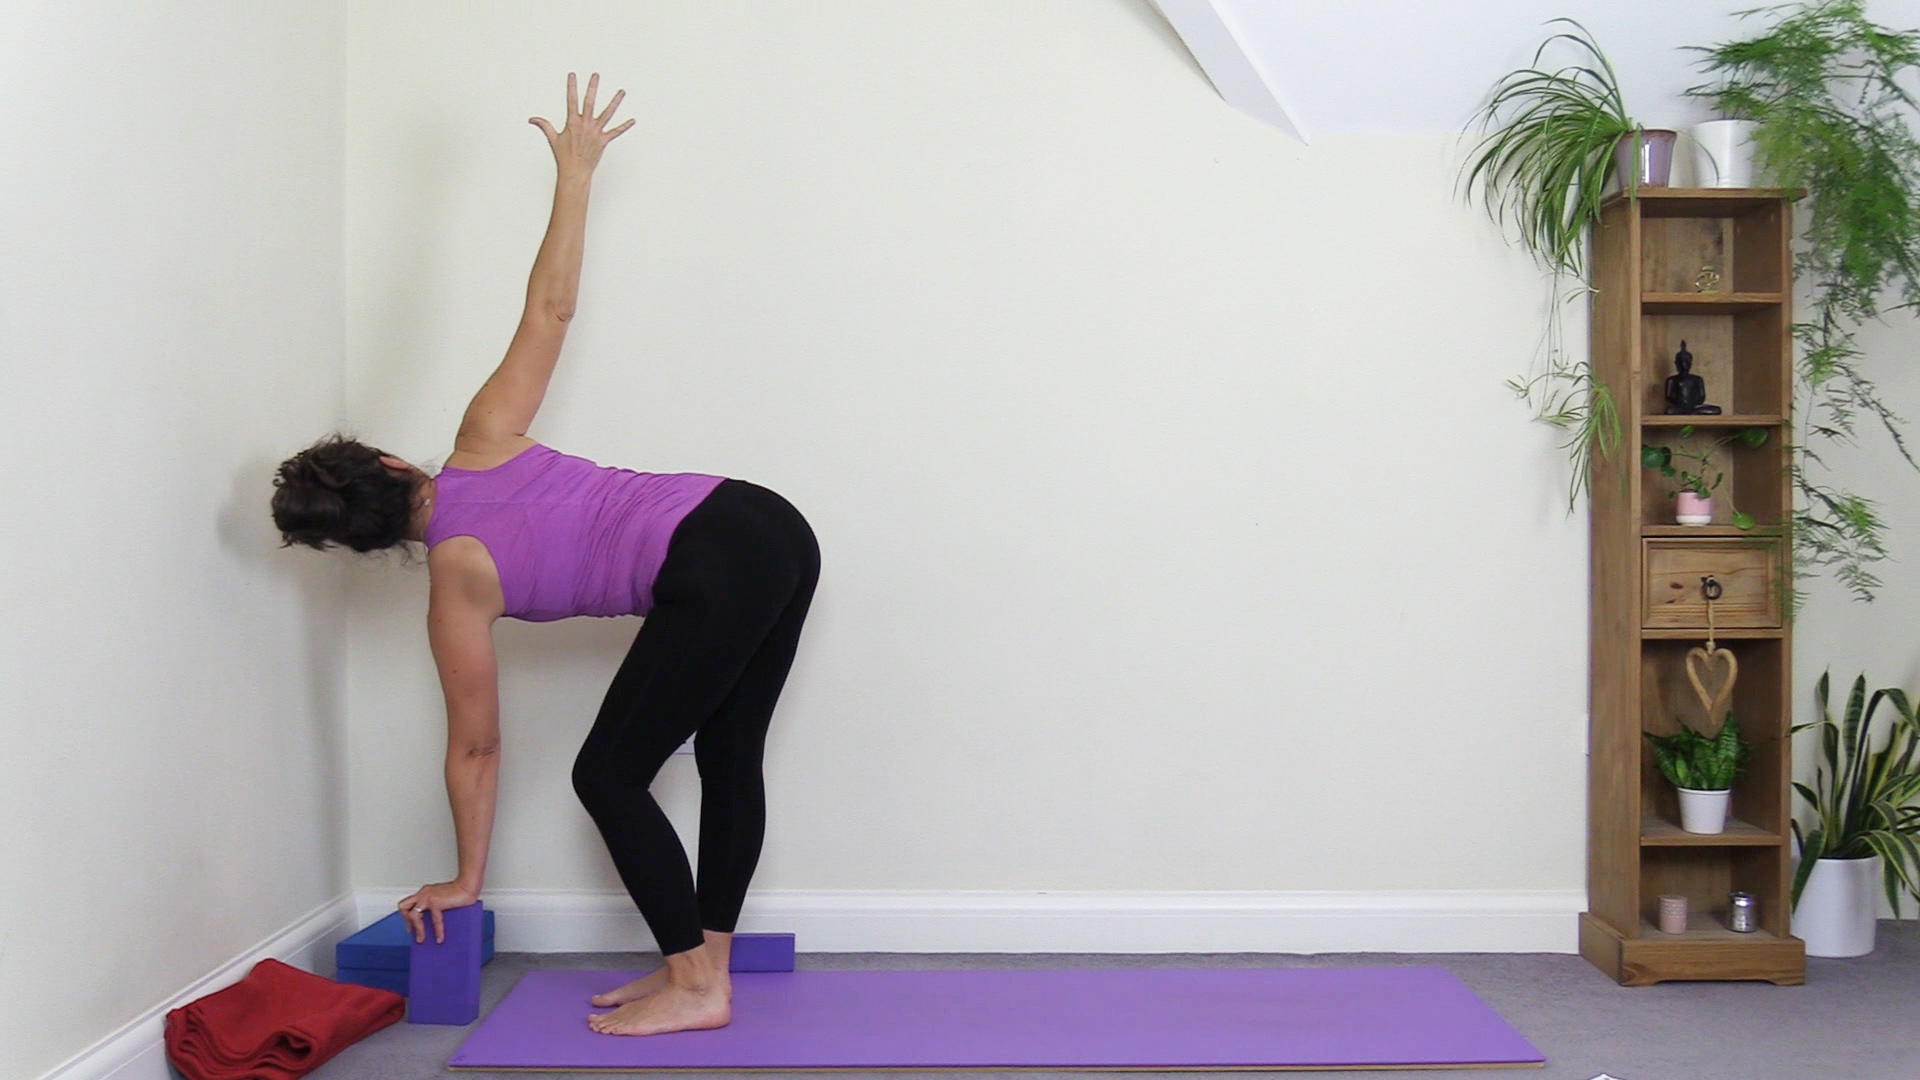 Exercising with Cyndy: Stretch away the stress